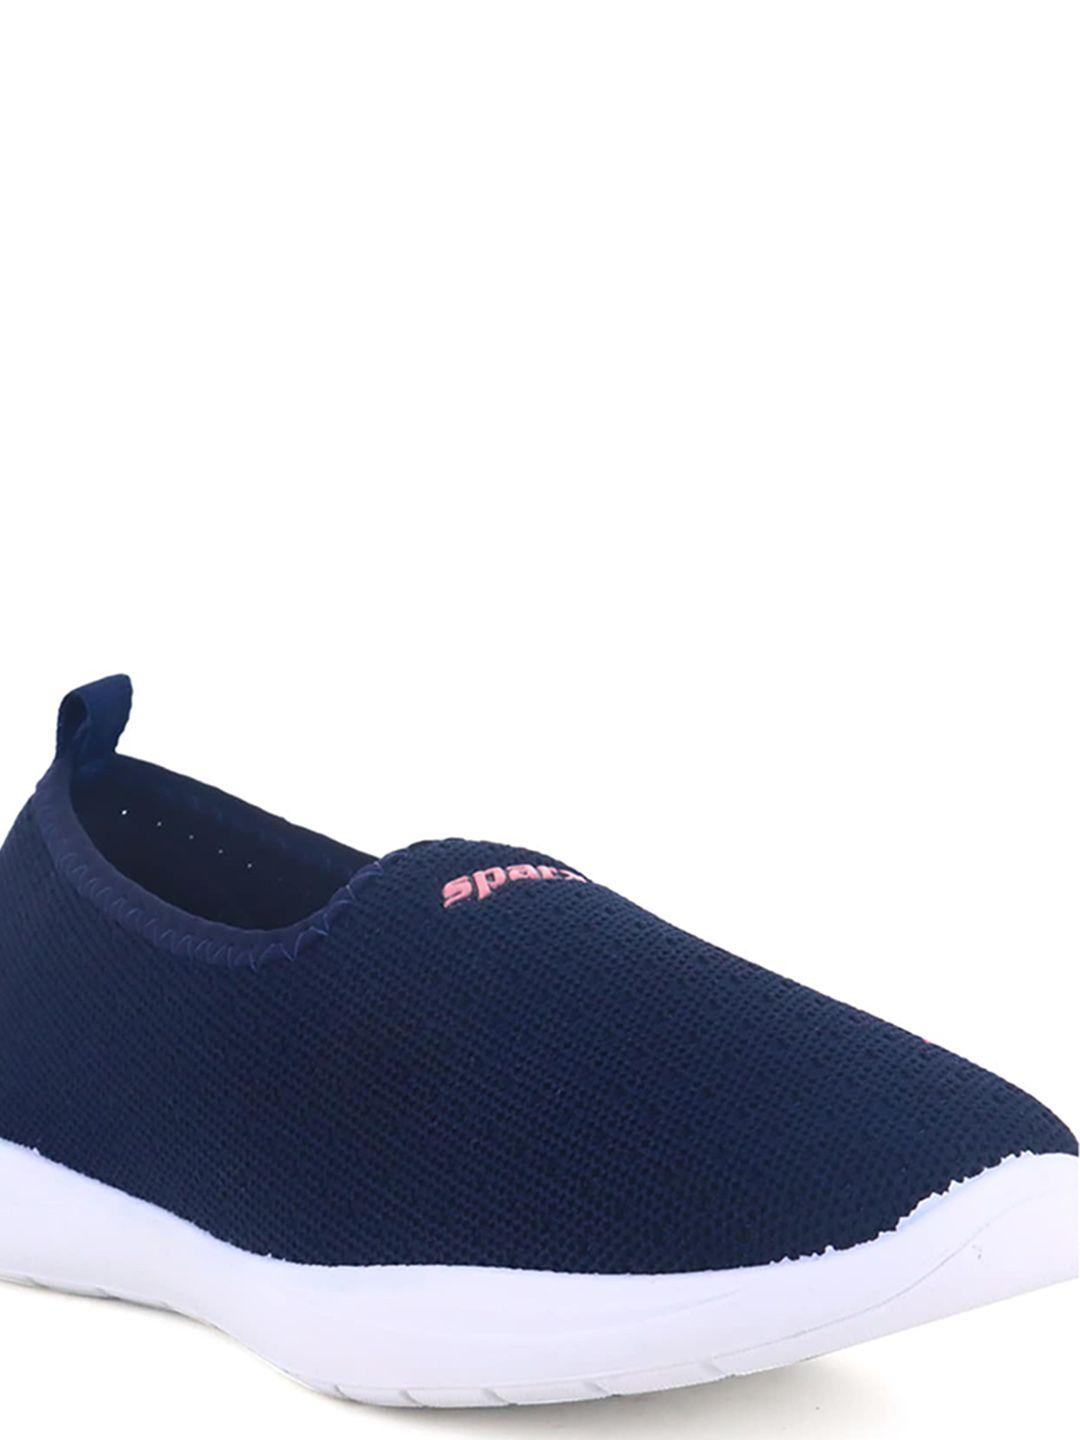 sparx women textured comfort insole slip-on sneakers